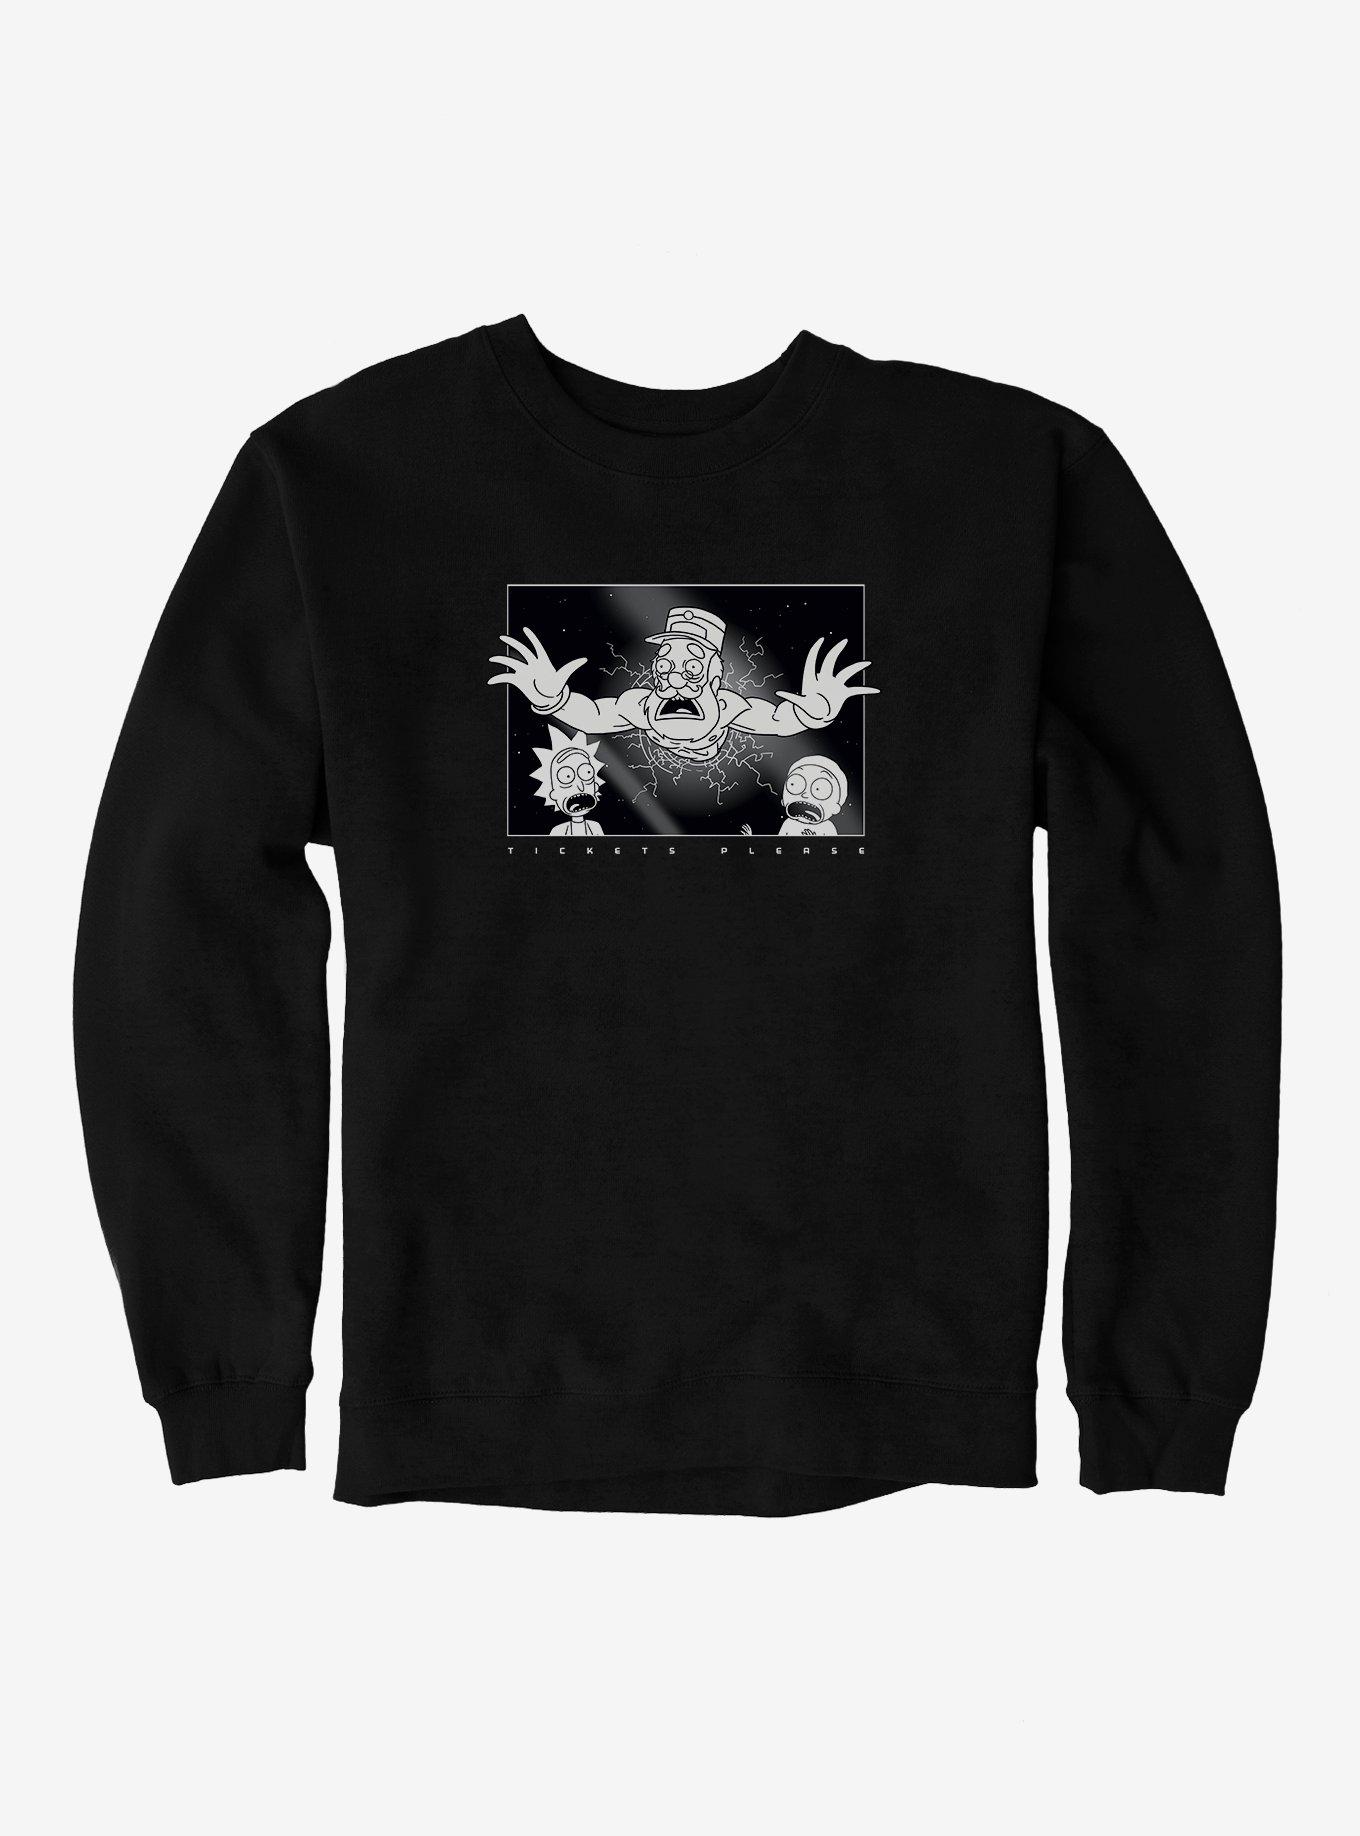 Rick And Morty Tickets Please Sweatshirt